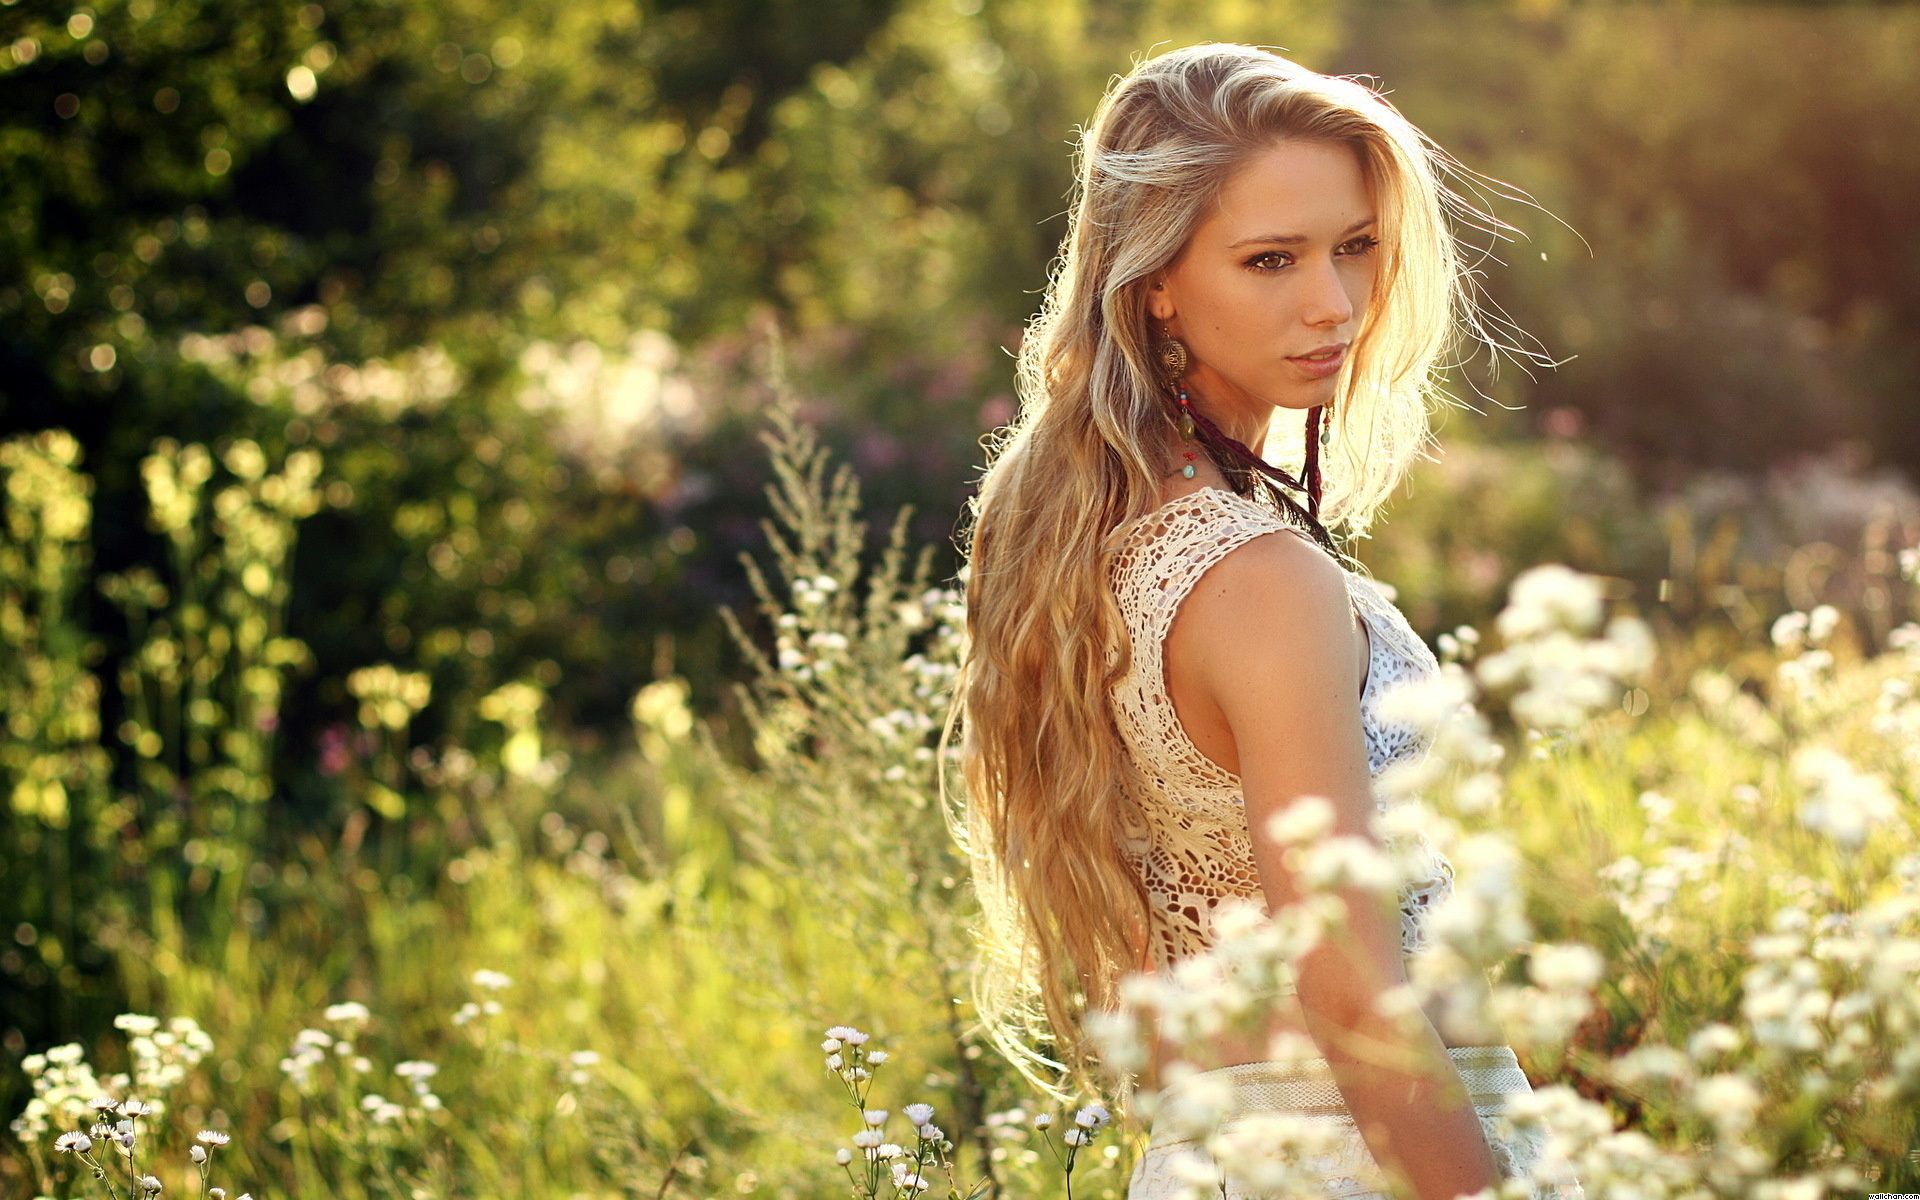 blonde girl wallpaper,people in nature,hair,nature,photograph,beauty